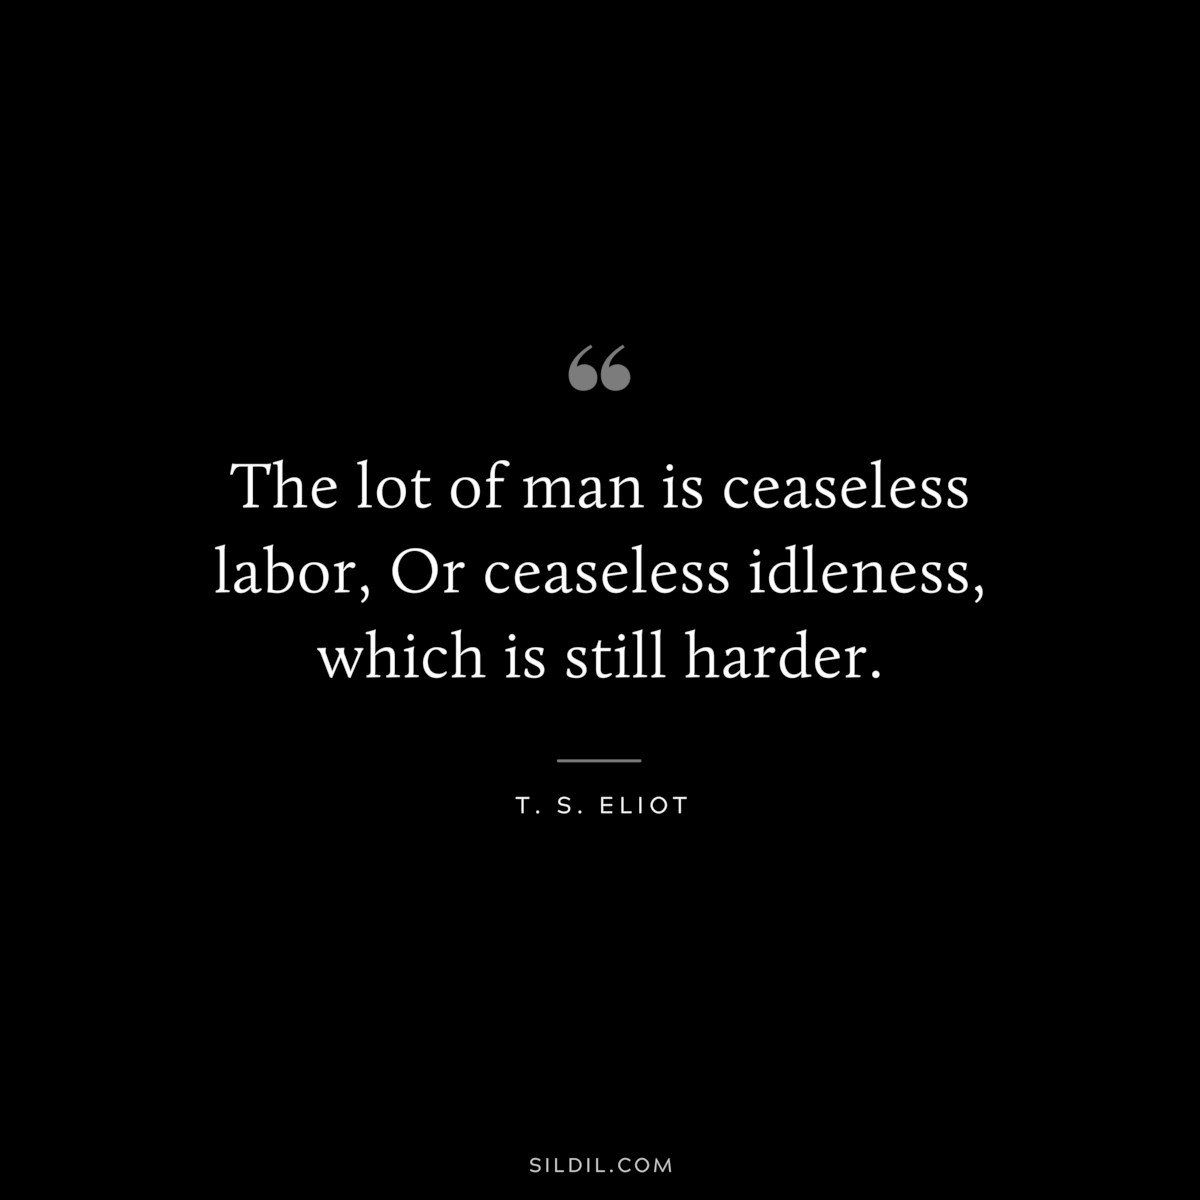 The lot of man is ceaseless labor, Or ceaseless idleness, which is still harder. ― T. S. Eliot